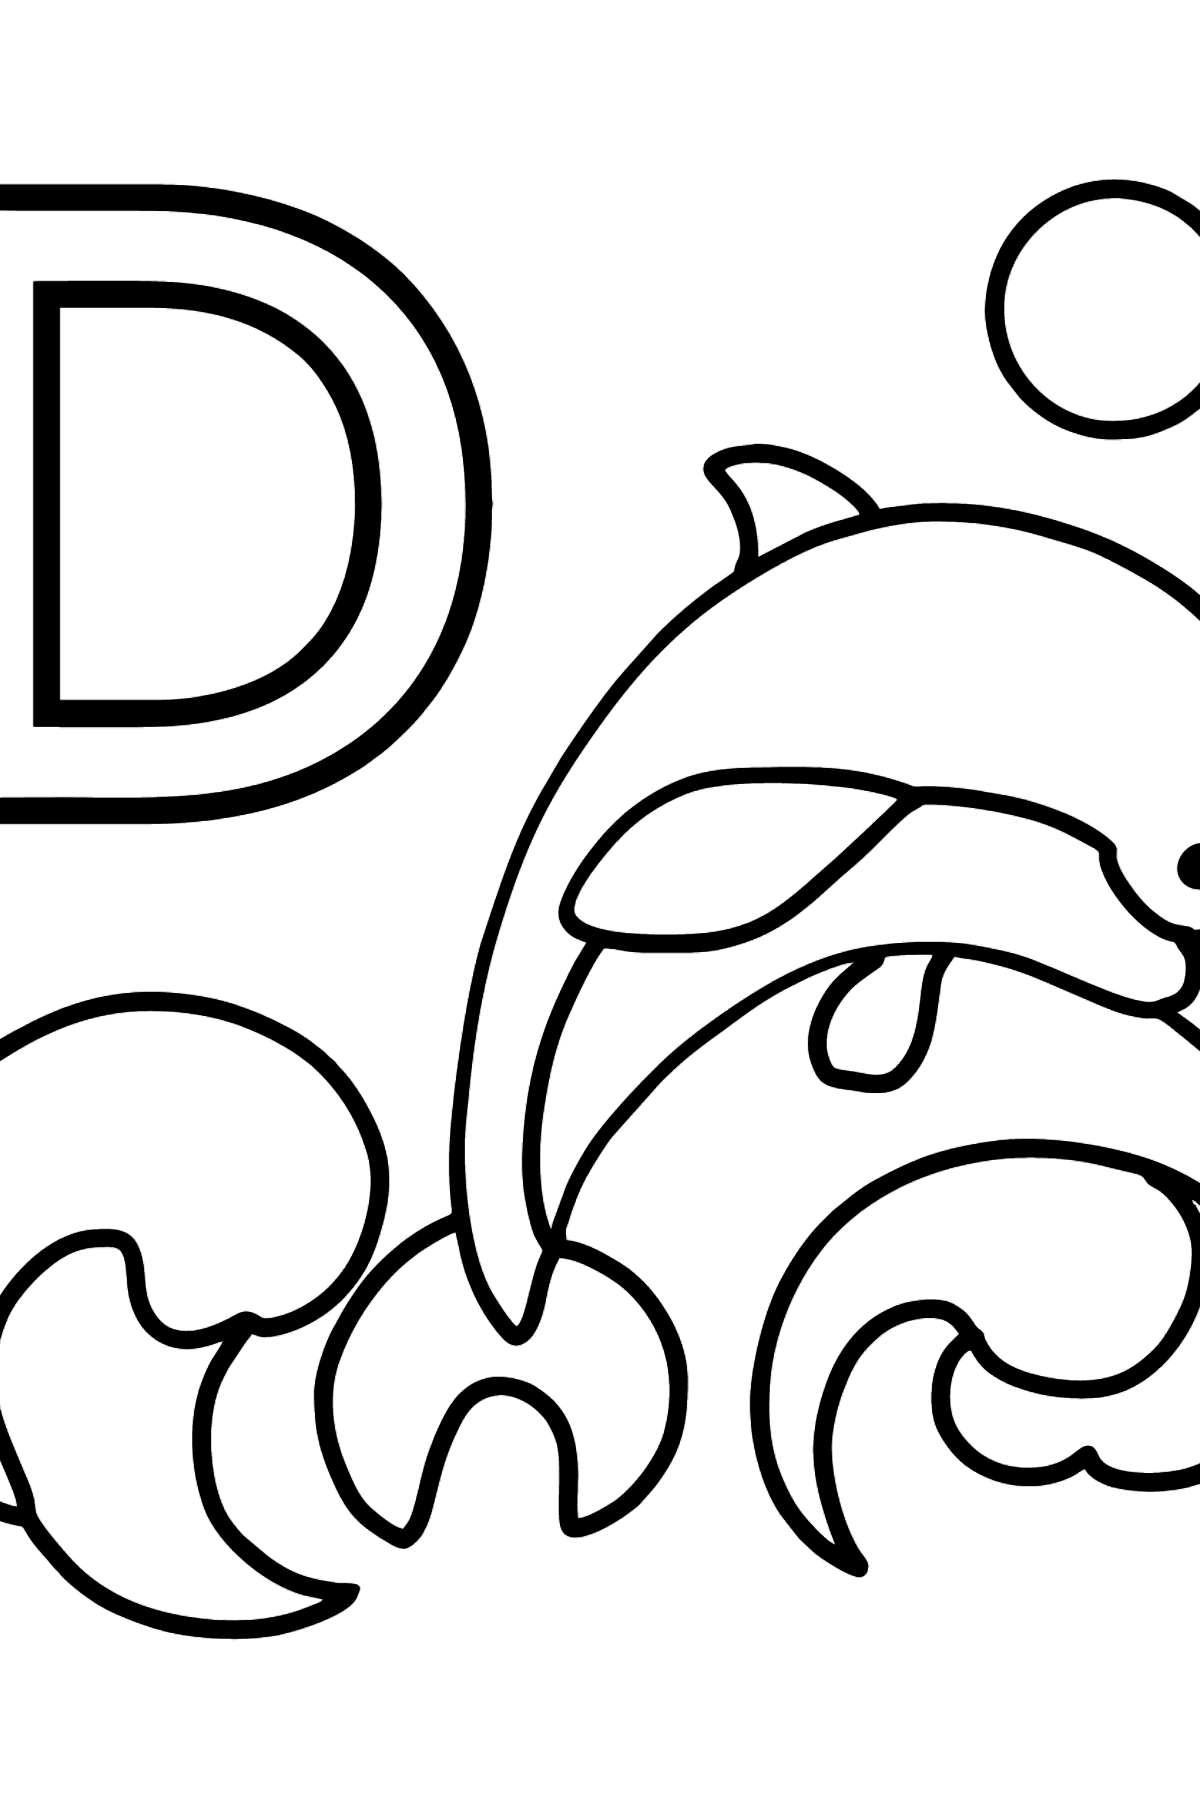 French Letter D coloring pages - DAUPHIN - Coloring Pages for Kids